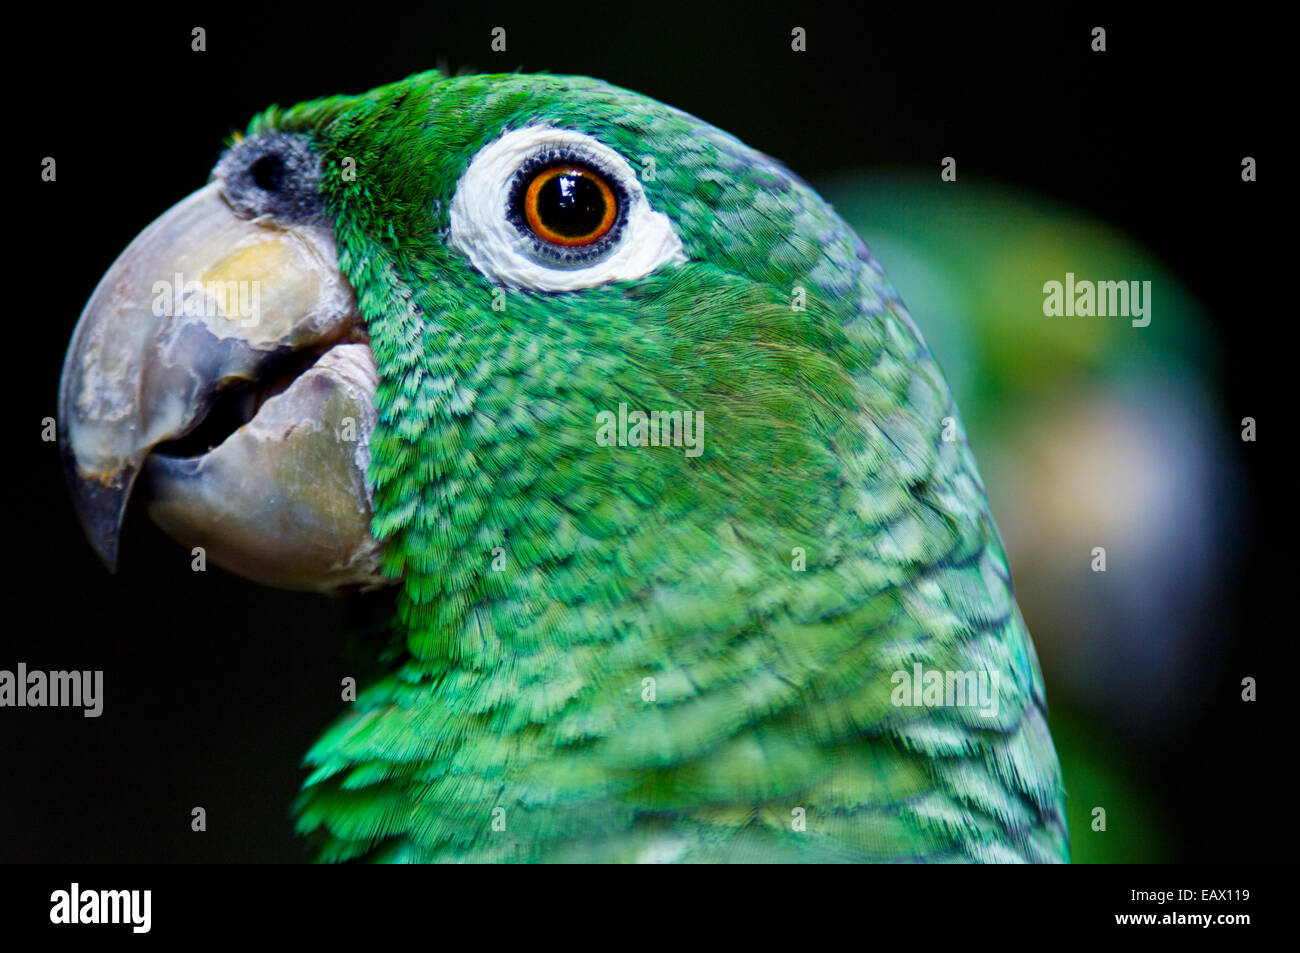 A Chapman's Mealy Amazon Parrot with it's hooked beak, white eye-ring and green plumage. Stock Photo